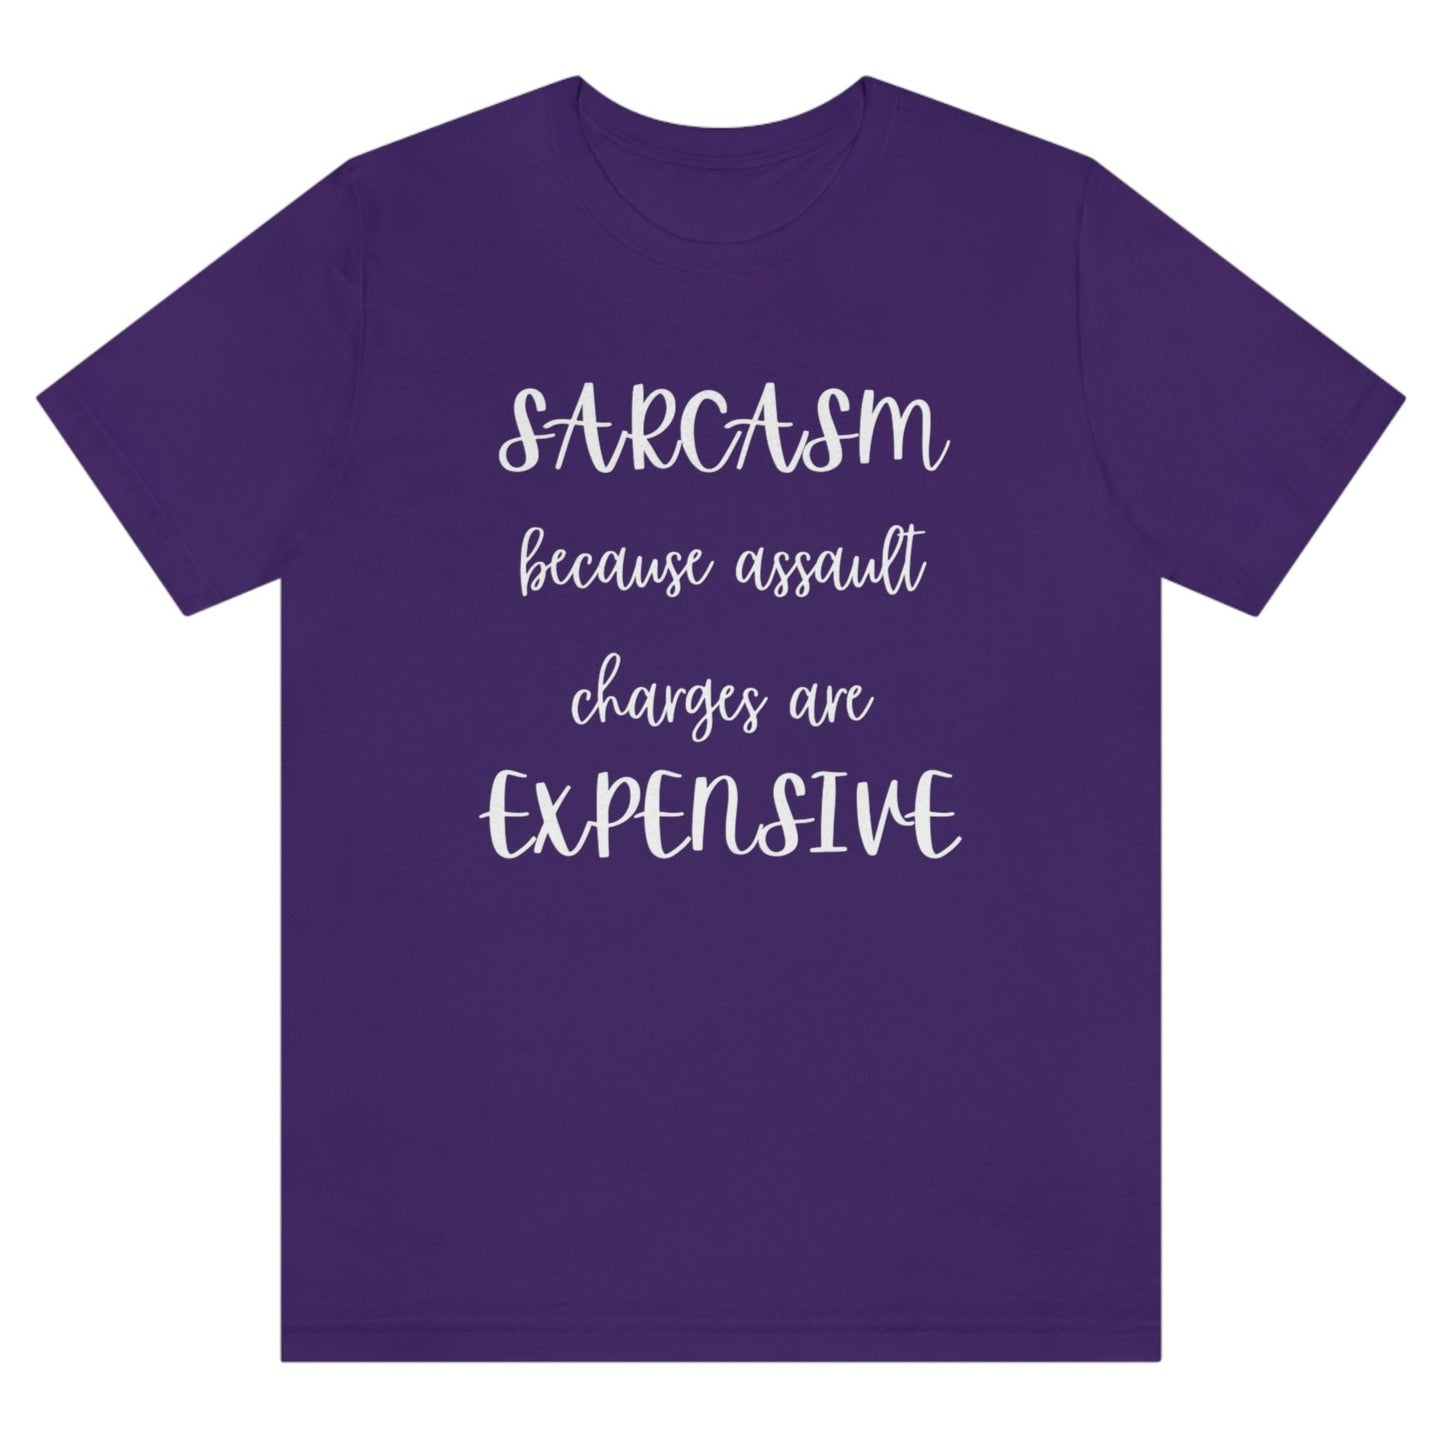 sarcasm-because-assault-charges-are-expensive-team-purple-t-shirt-women-funny-sarcastic